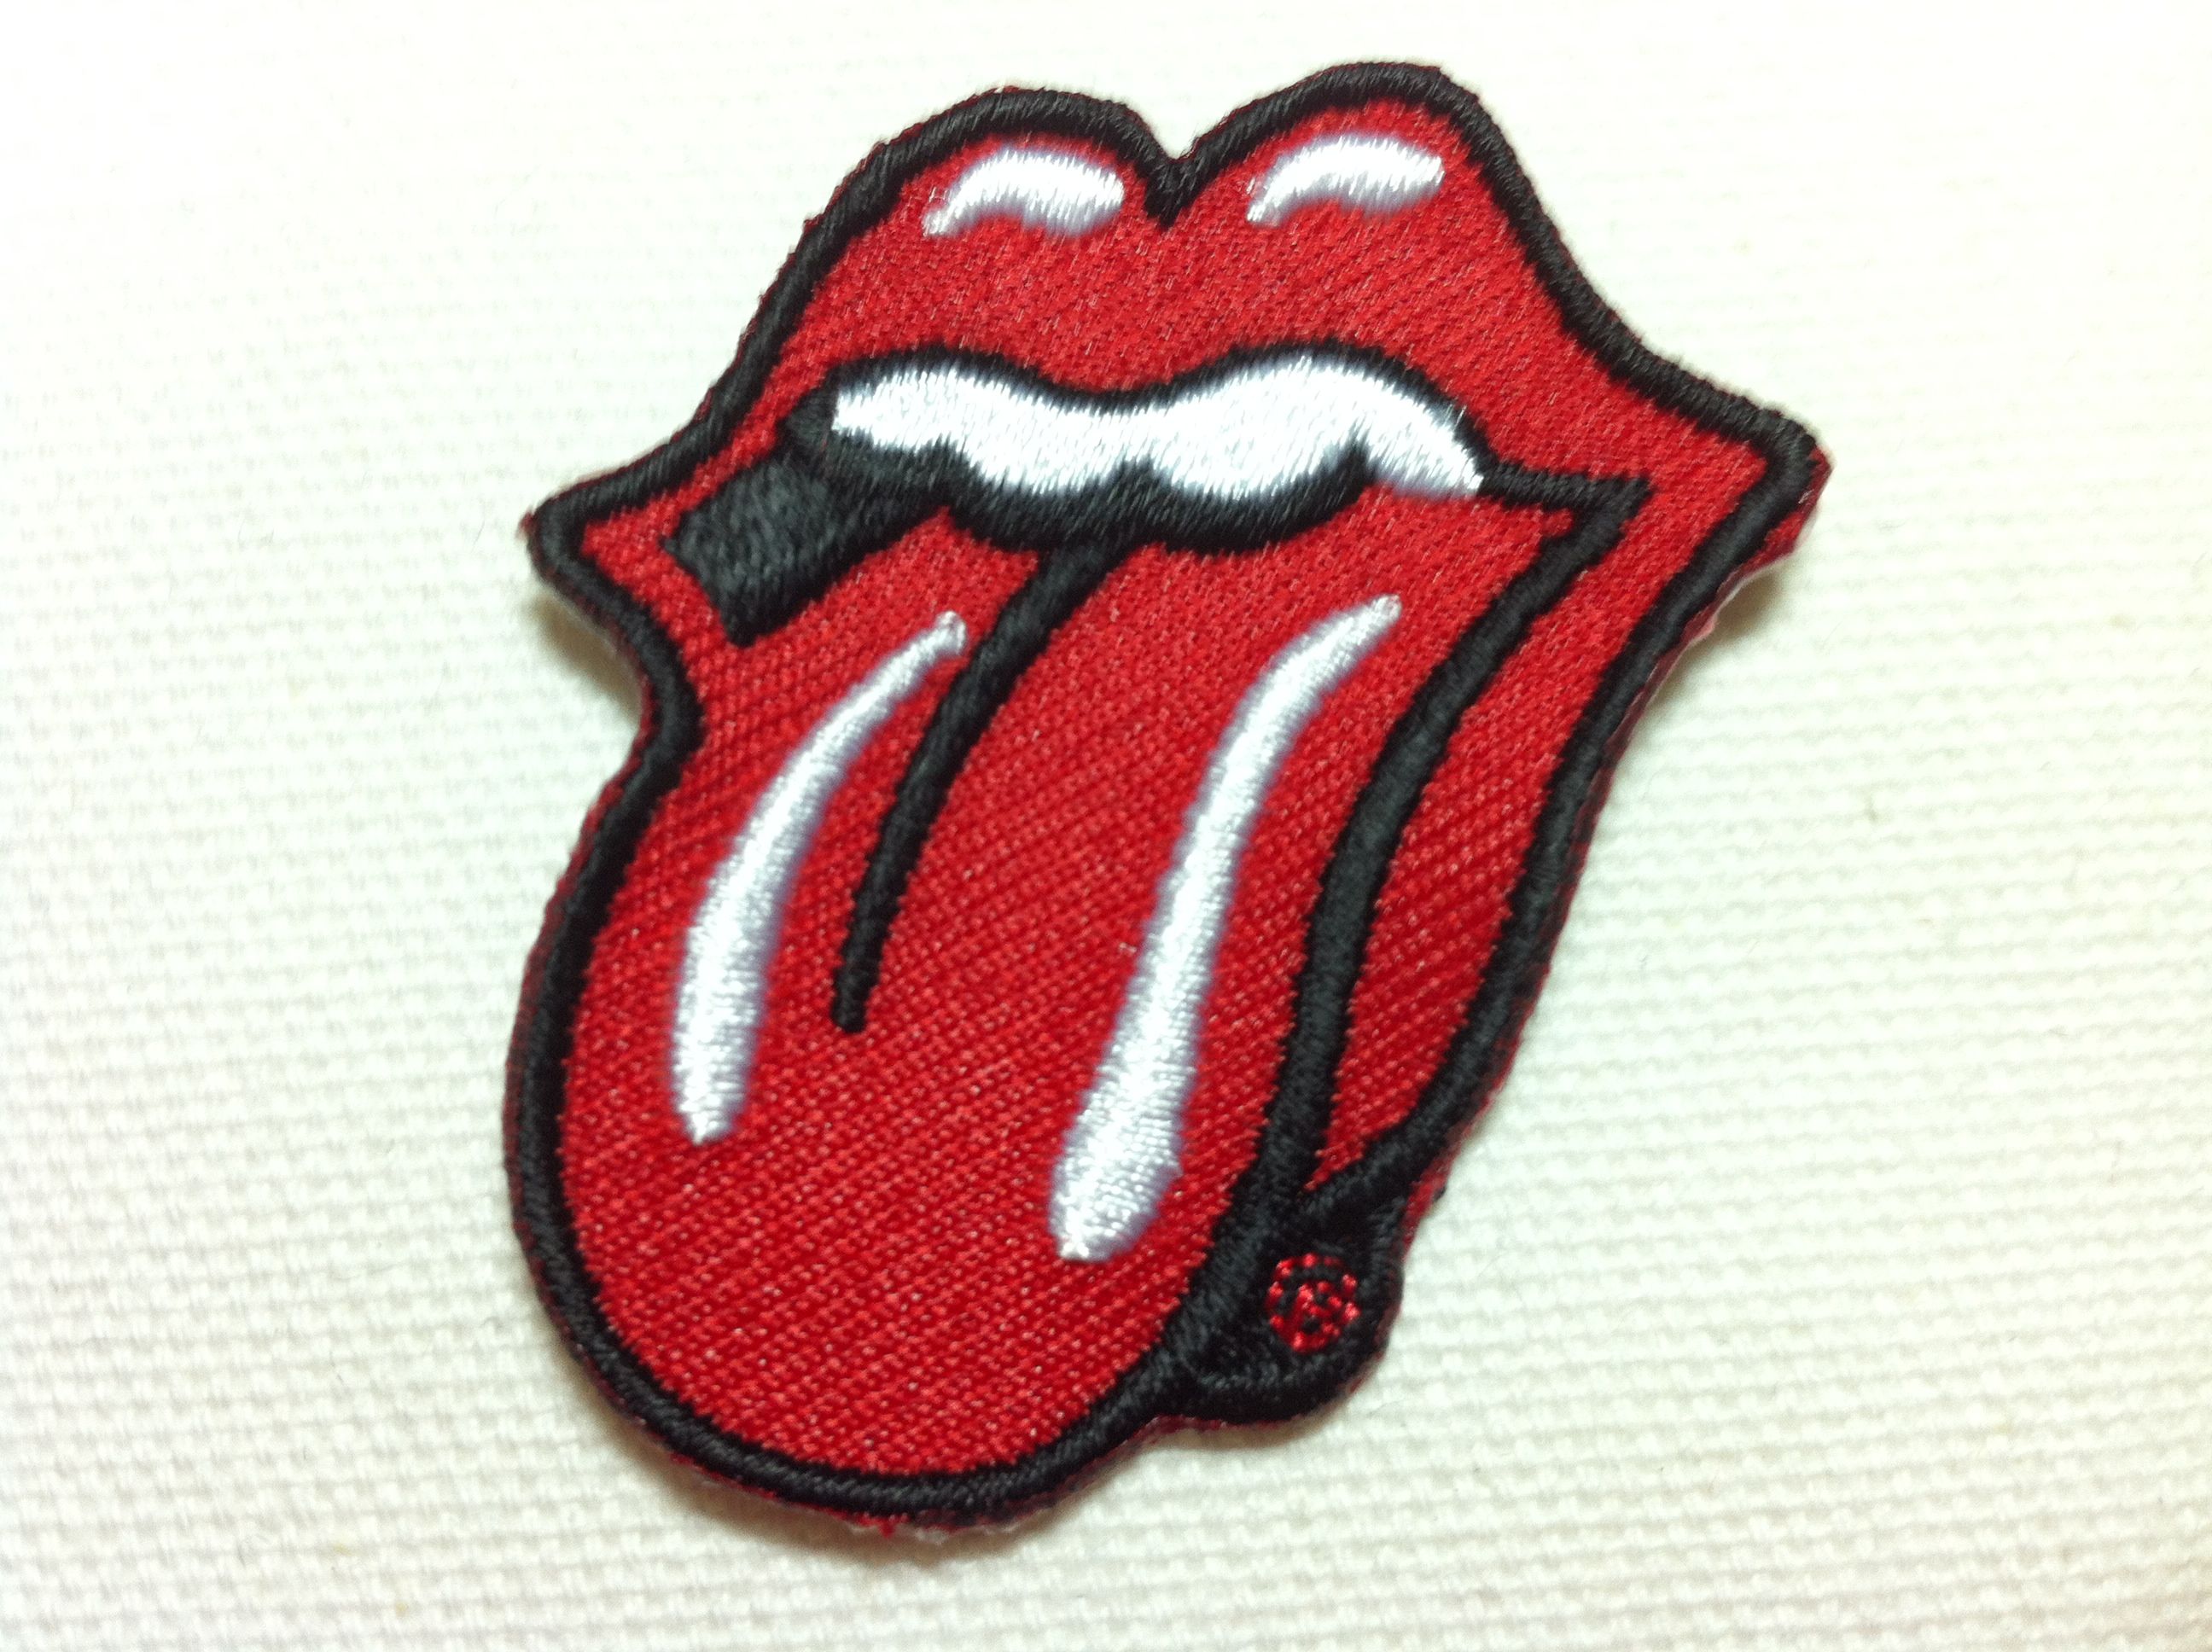 Punk Style Lips Tongue Mouth 5 X 5.5cm Cool Patch Embroidered Applique Iron  On Patch From Sukidesign, $5.03